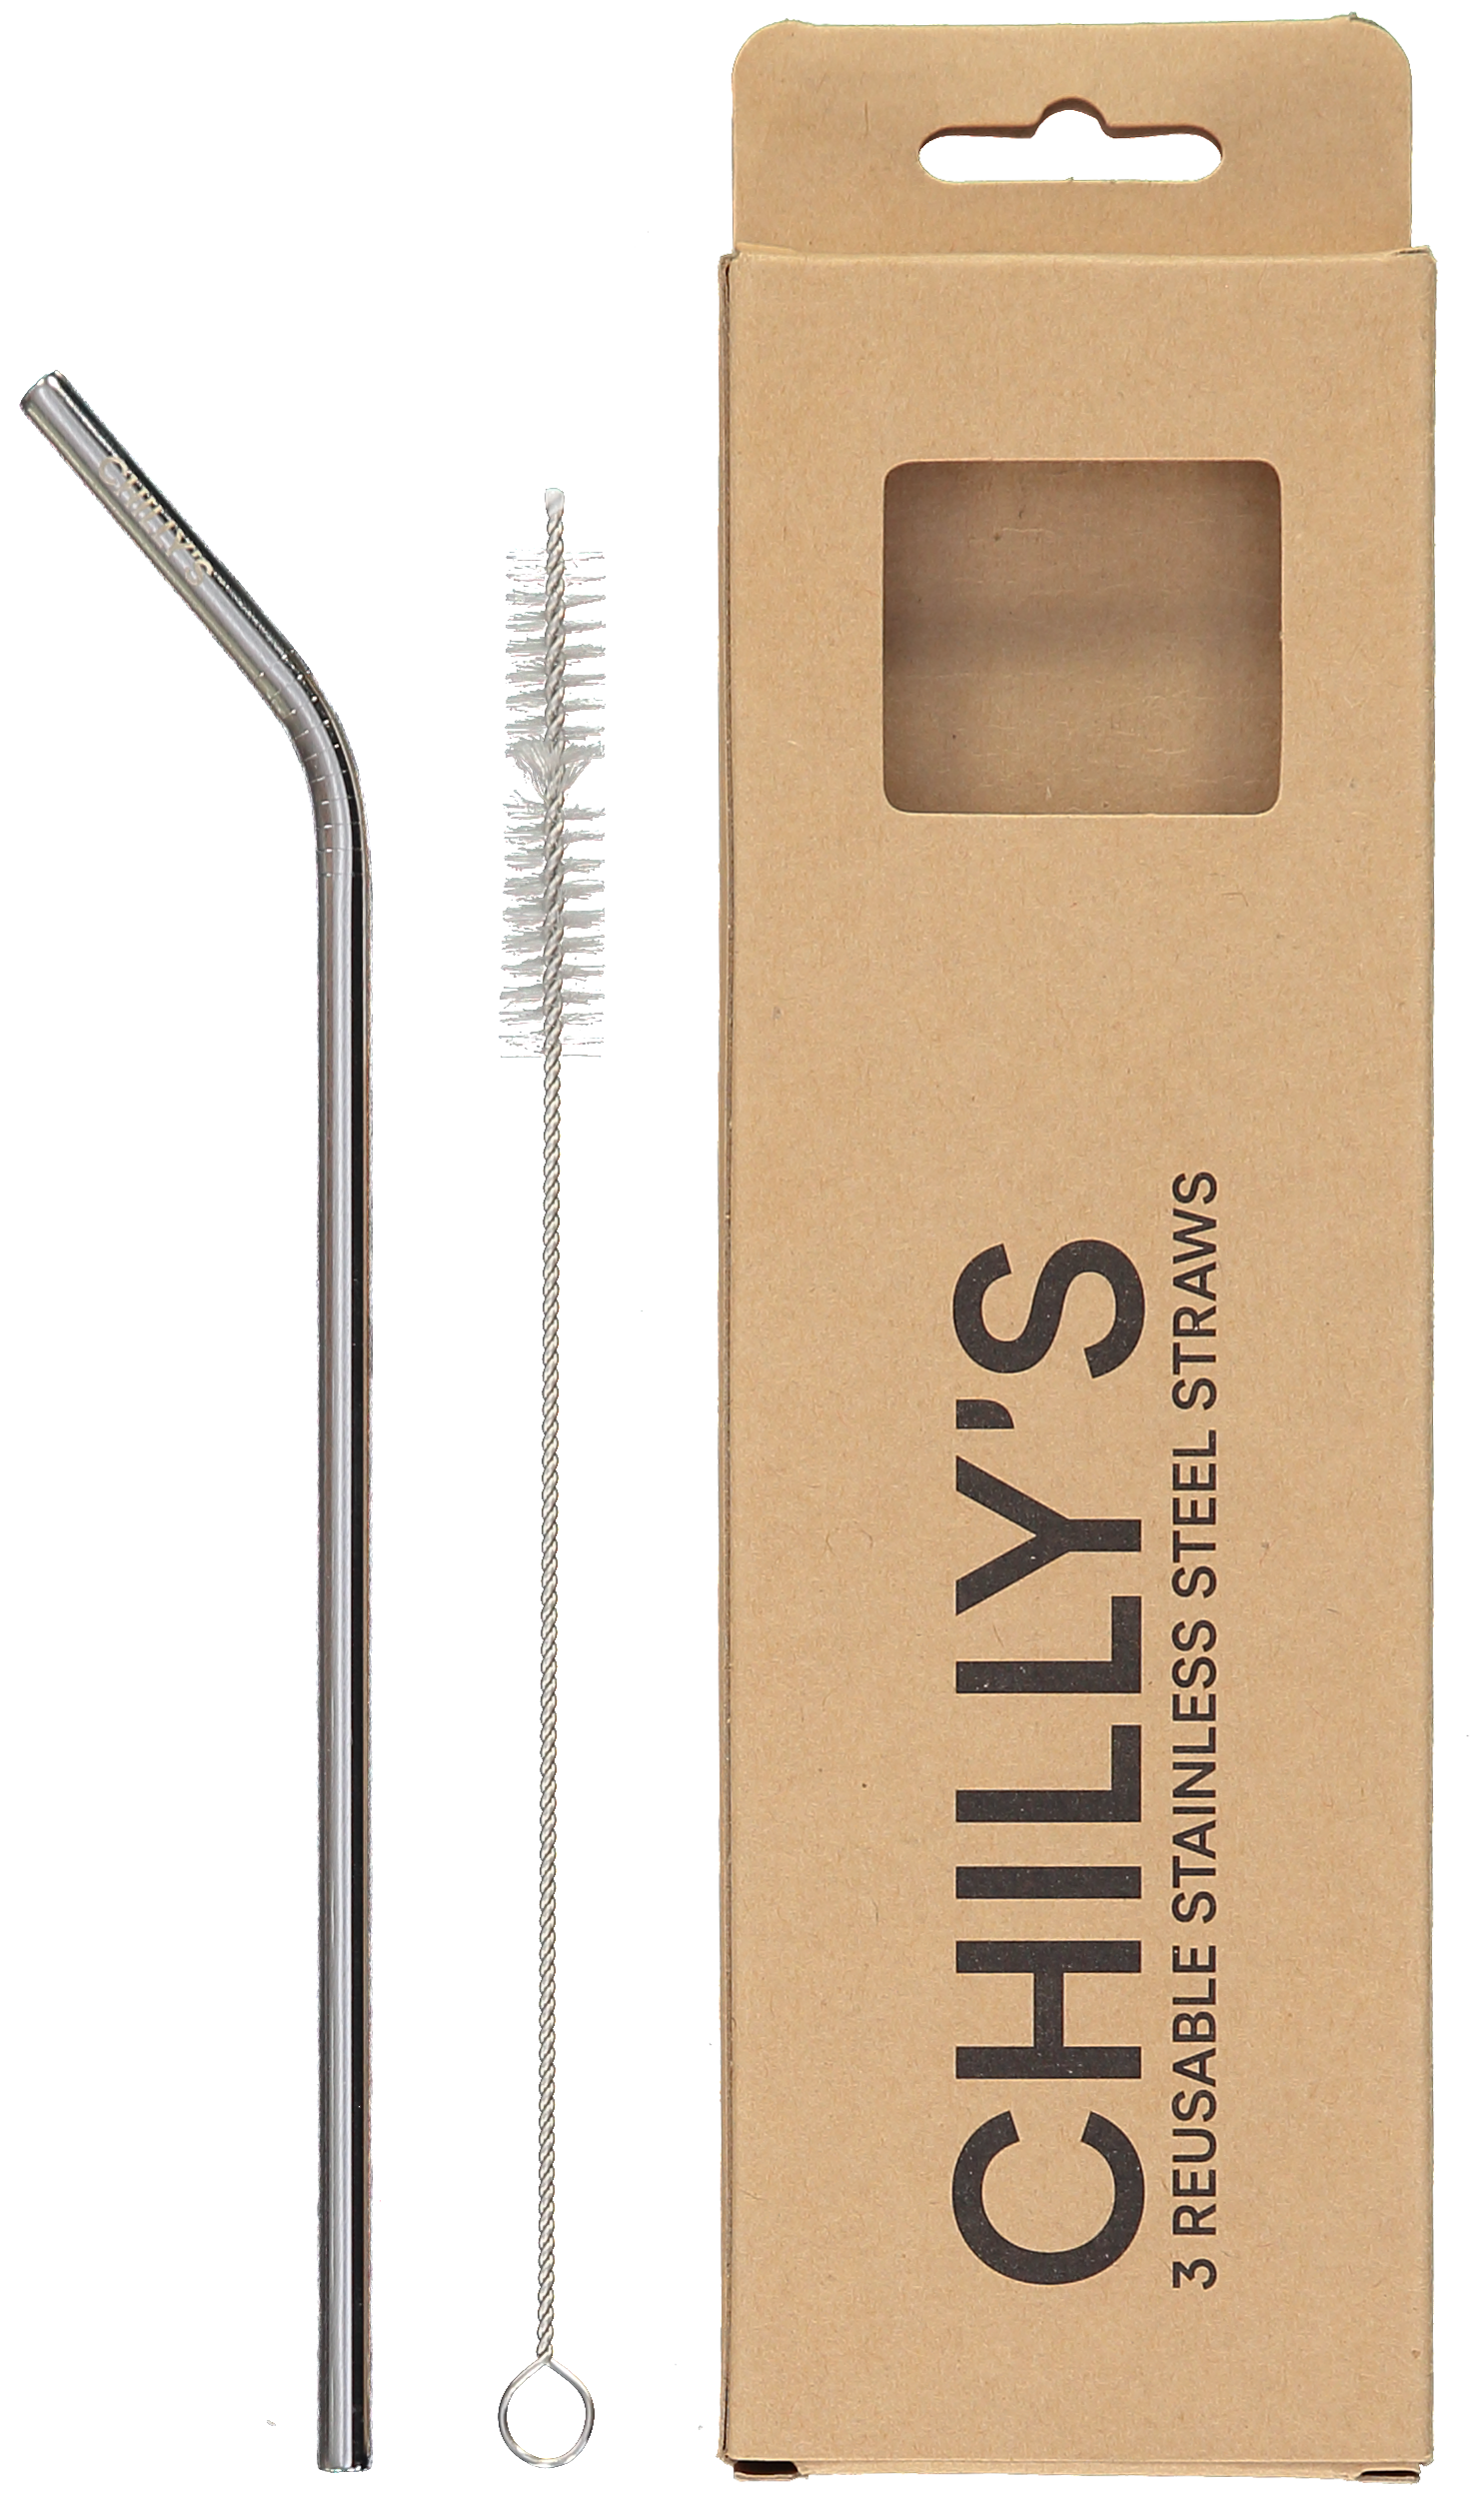 Chilly's 3 reusable stainless steel straws